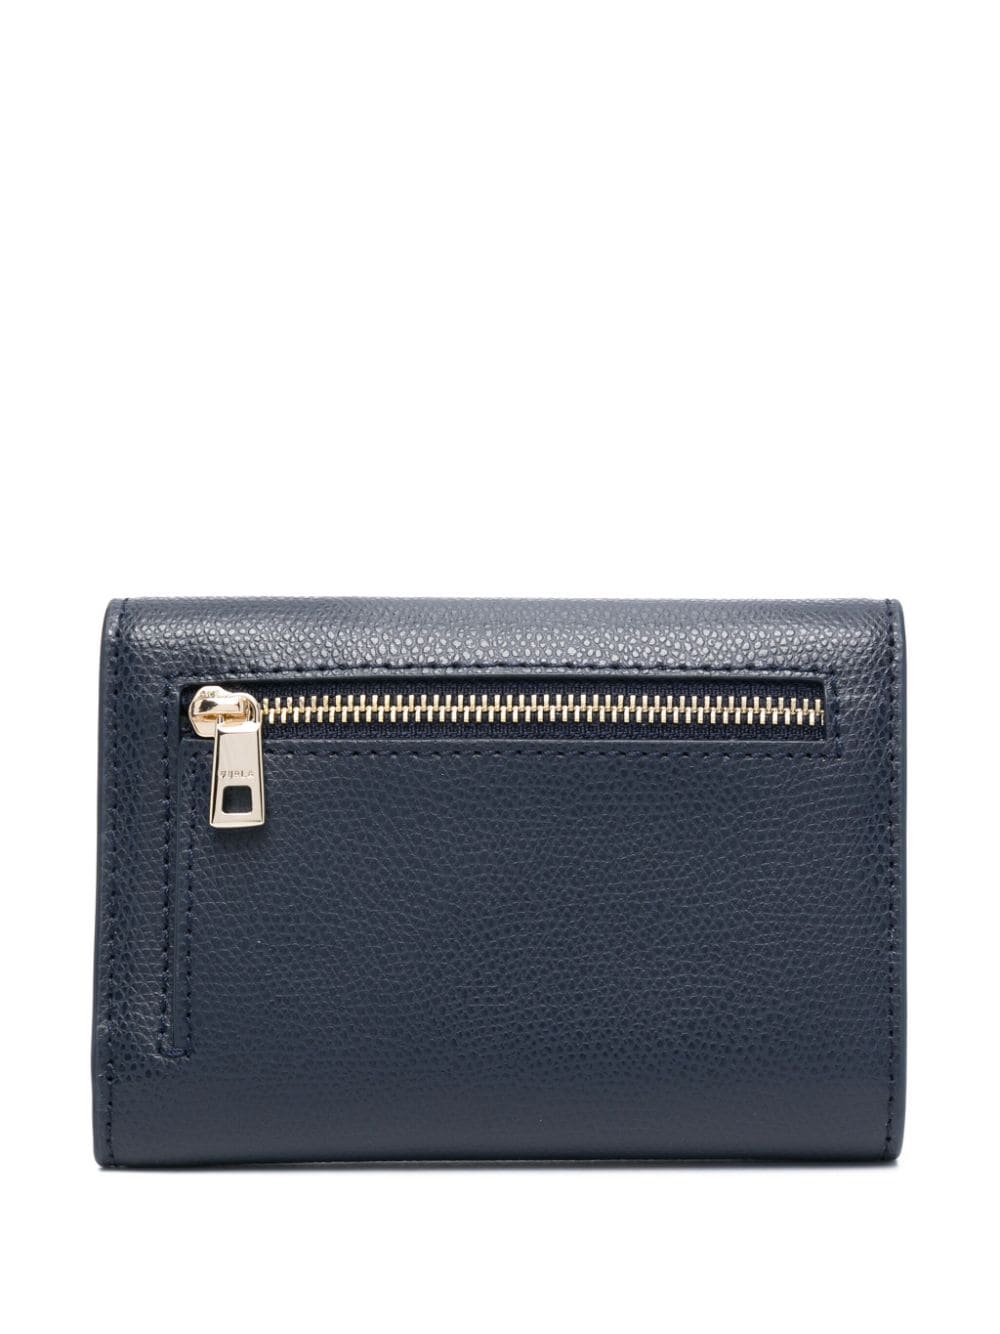 Shop Furla 1927 Compact M Leather Wallet In Blue